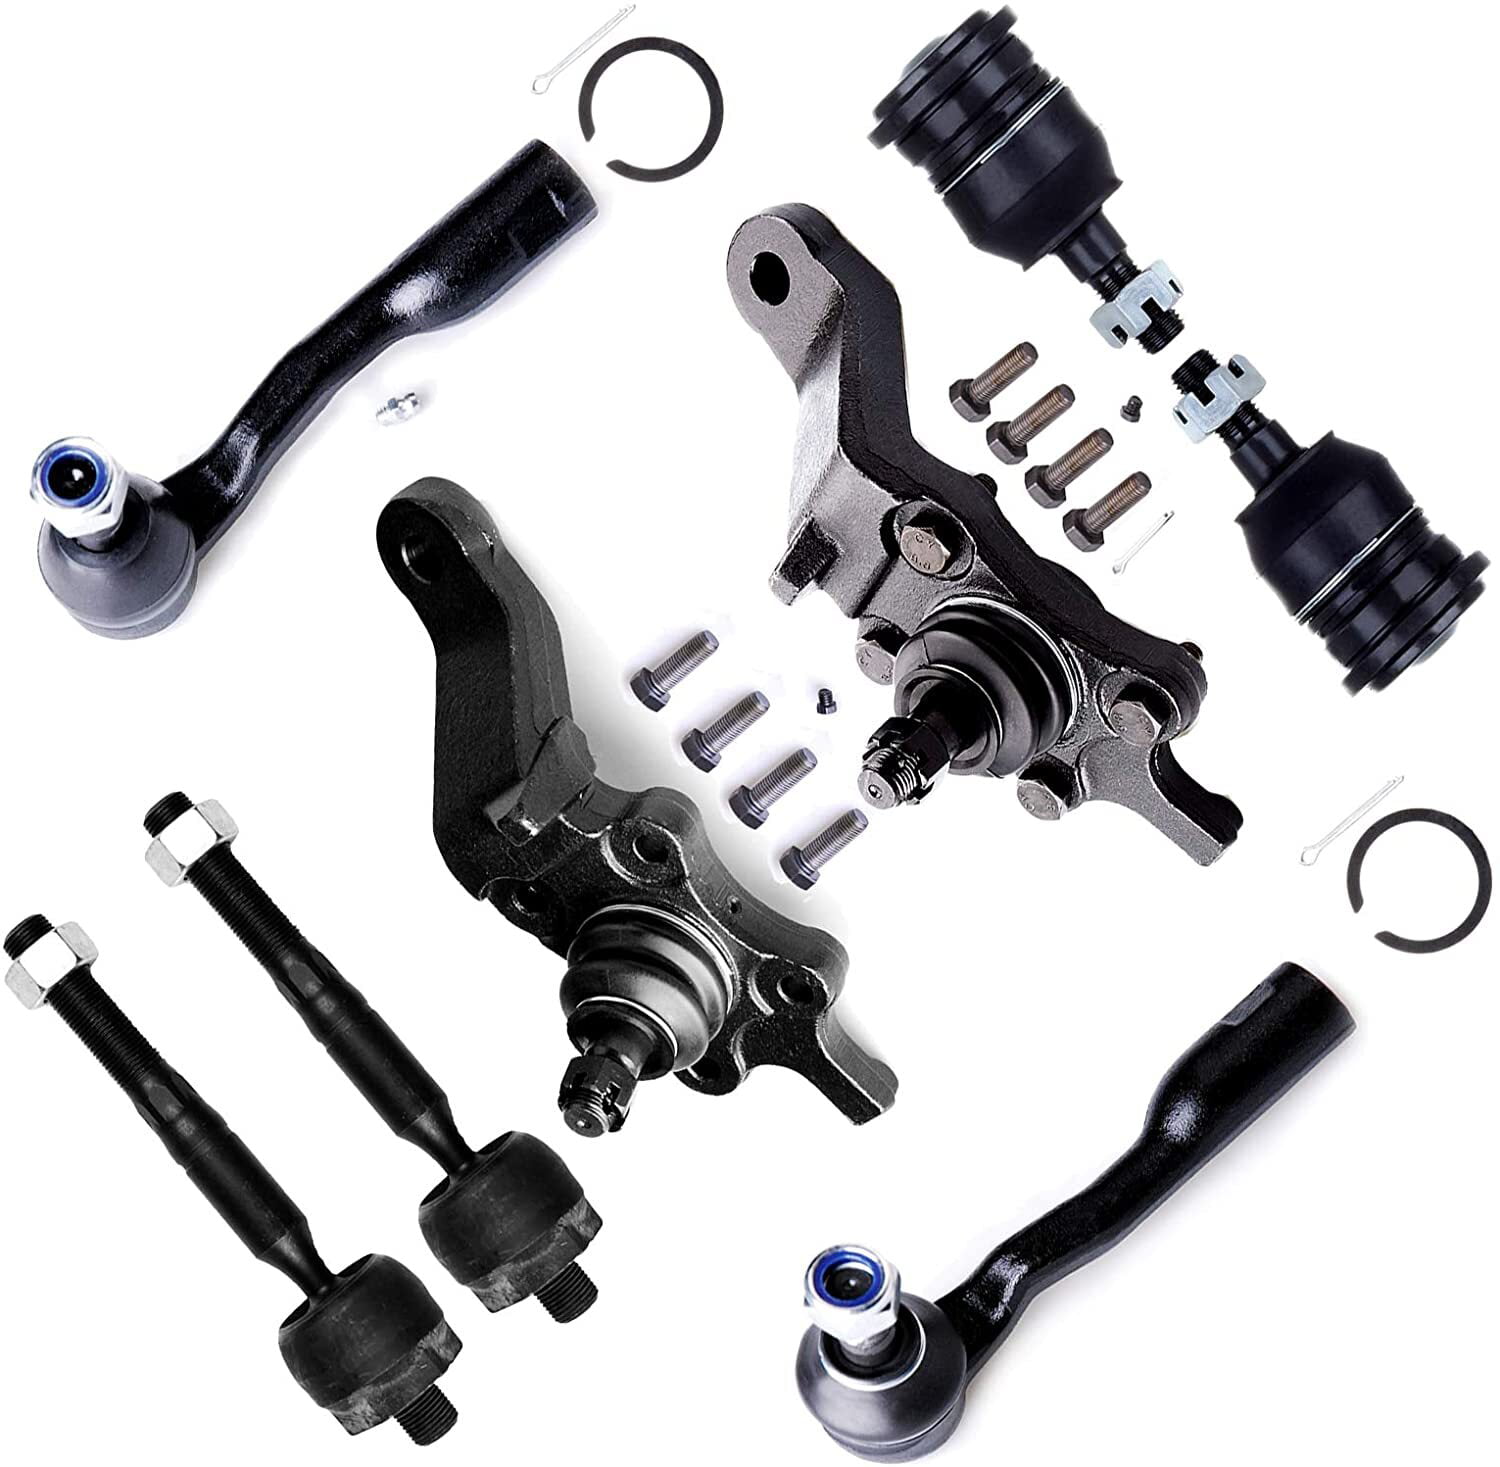 PartsW 6 Pc New Front Suspension Kit for TOYOTA SEQUOIA 2001-2002 & TOYOTA TUNDRA 2000-2002 Upper & Lower Ball Joints Outer Tie Rod End Left & Right Side 